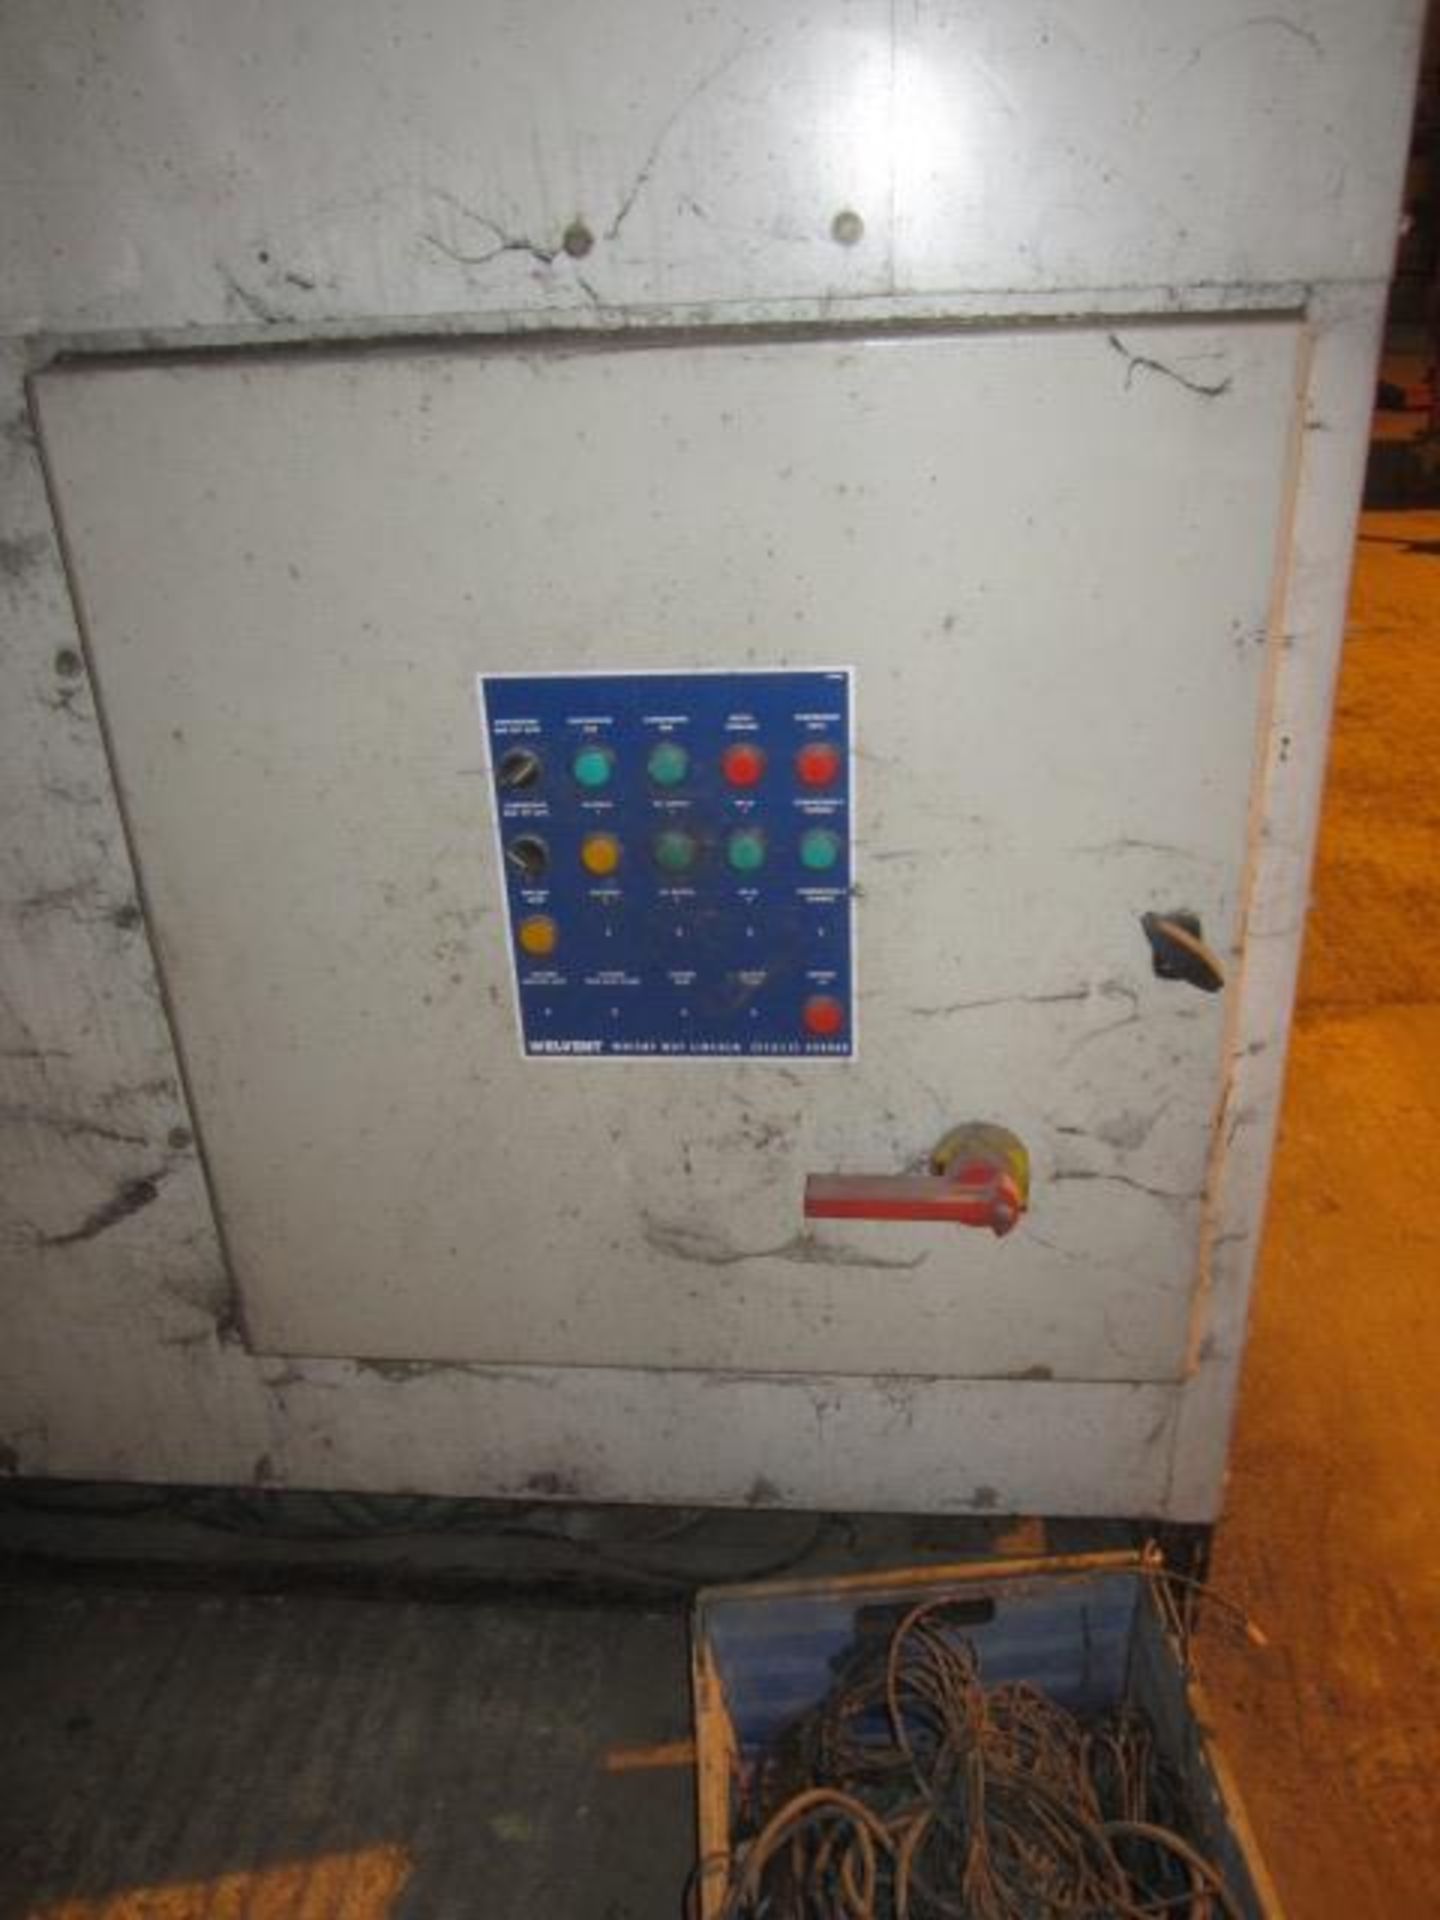 Welvent Model 20KW packaged refrigeration unit, s/n: A18645/2004,Refrigerant type R404a, Welvent - Image 3 of 11